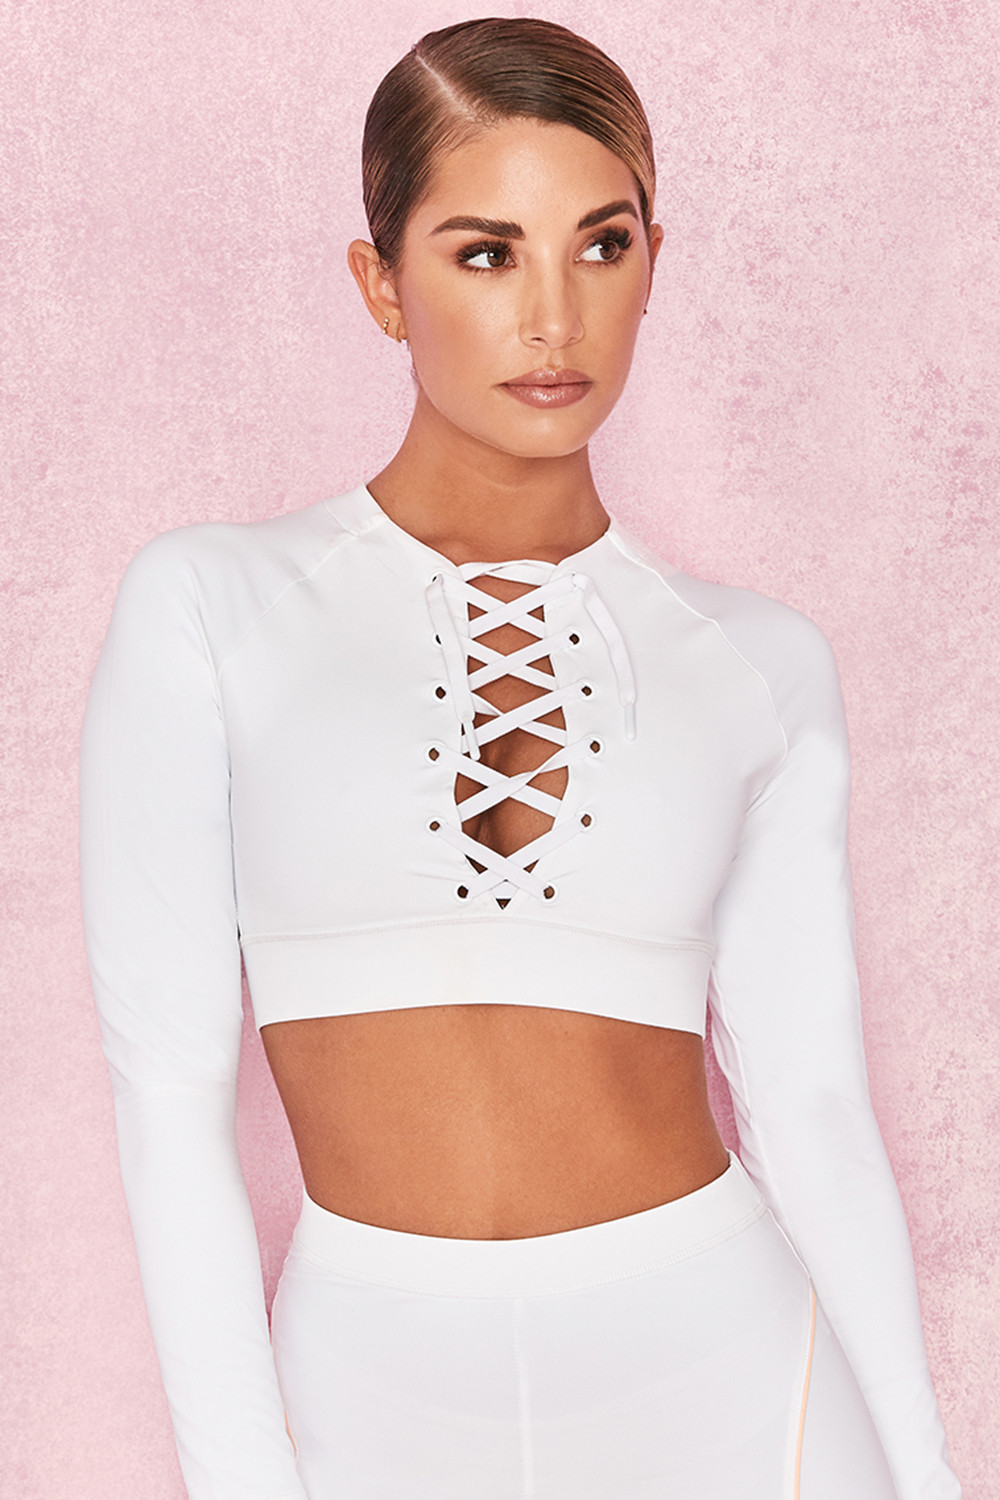 'Fuse' White Long Sleeved Lace Up Top